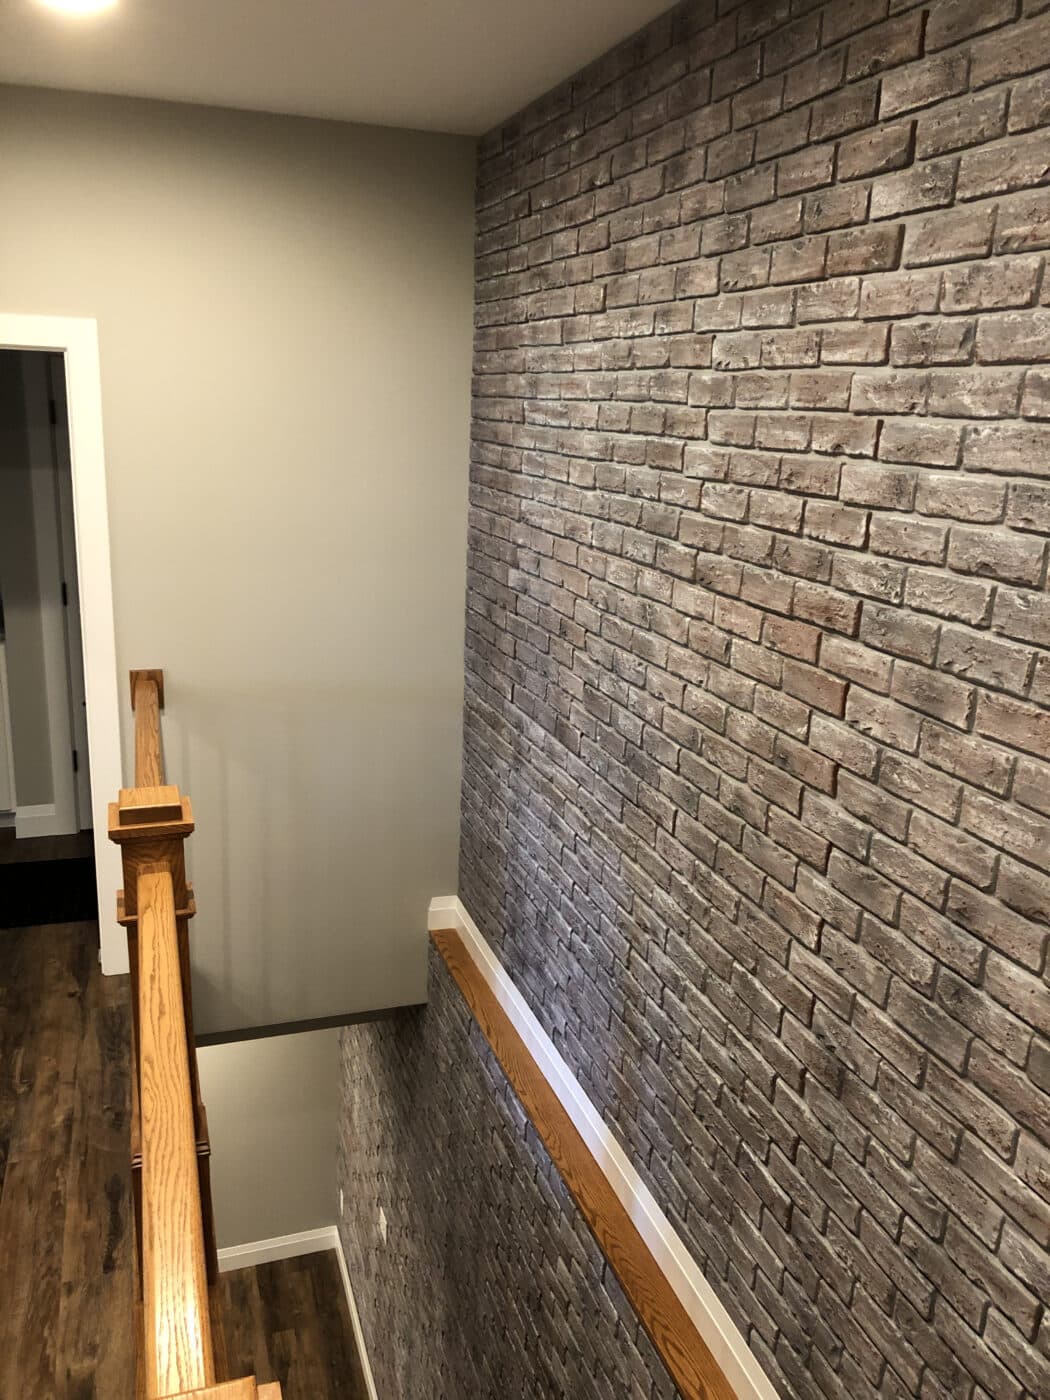 GenStone Chicago brick veneer staircase accent wall